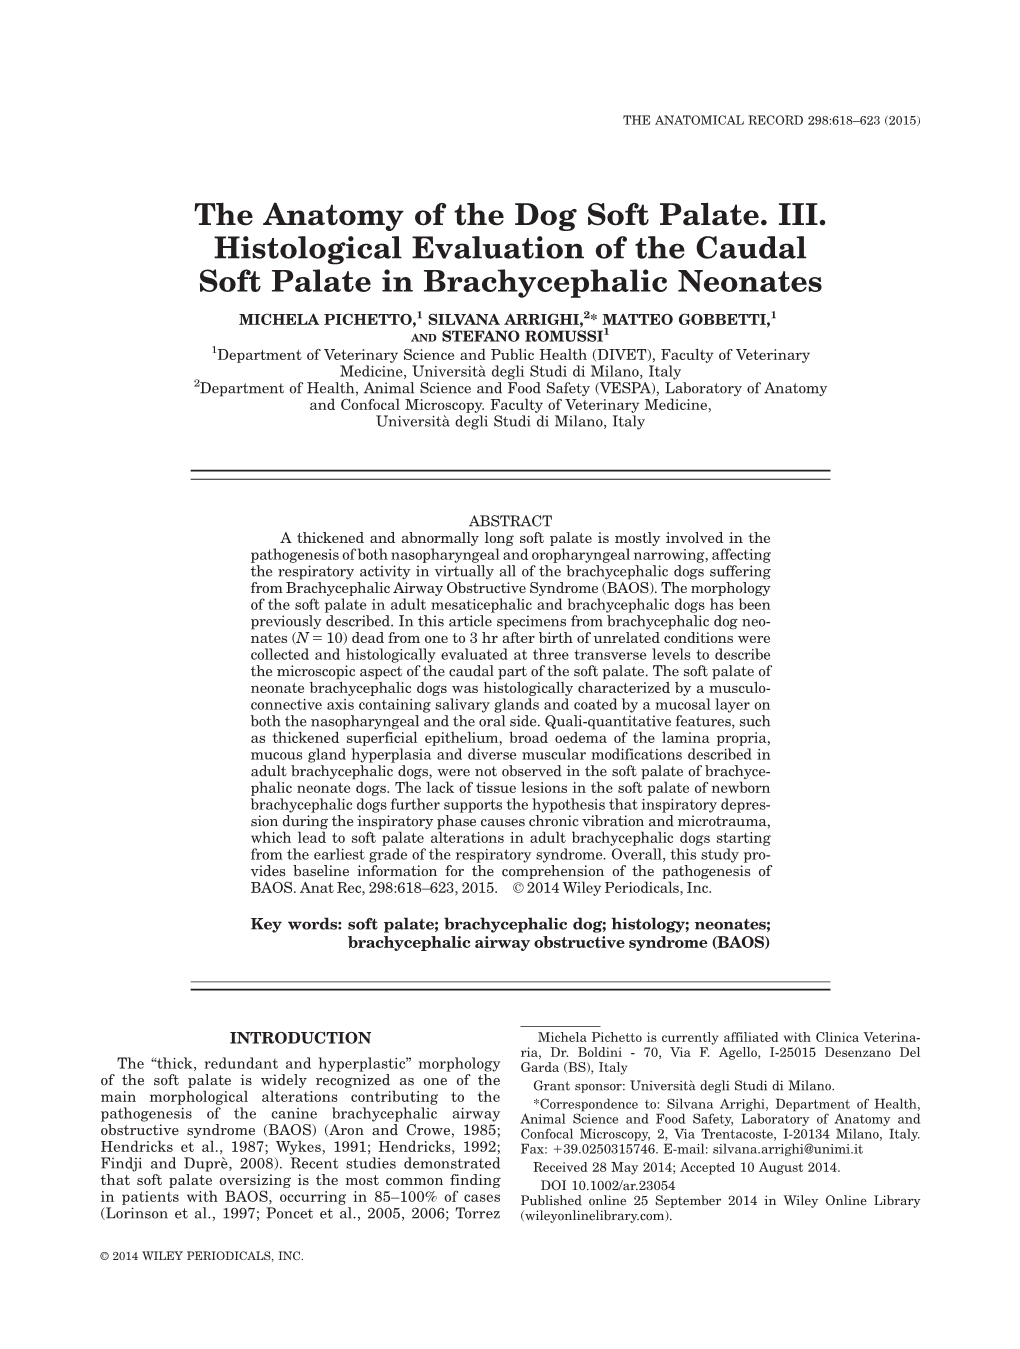 The Anatomy of the Dog Soft Palate. III. Histological Evaluation of the Caudal Soft Palate in Brachycephalic Neonates